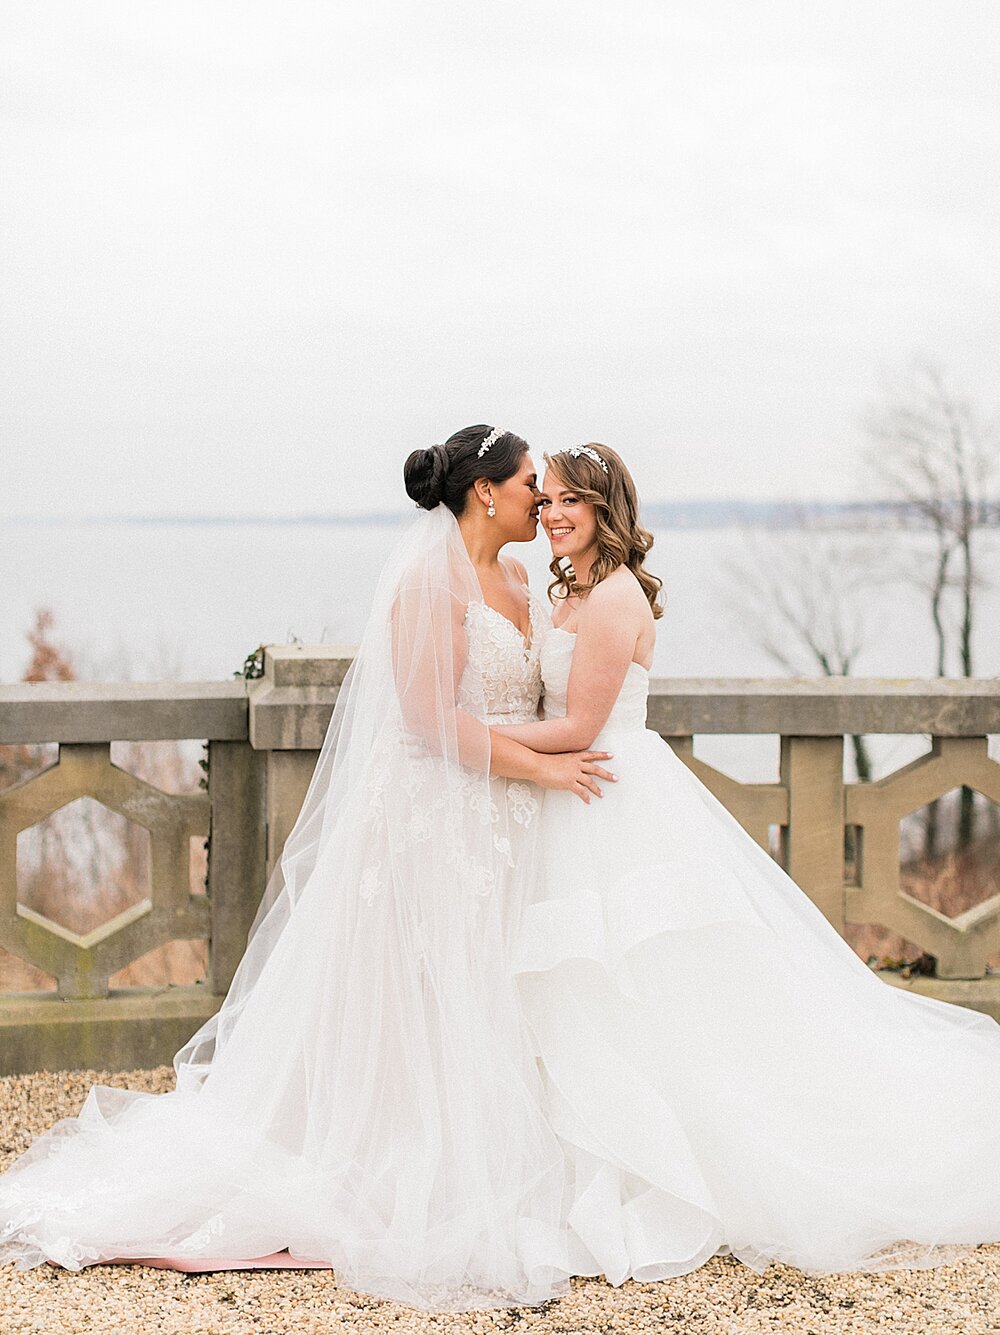 brides embrace on patio at Sands Point NY wedding venue | Tri-State area wedding venues photographed by Asher Gardner Photography